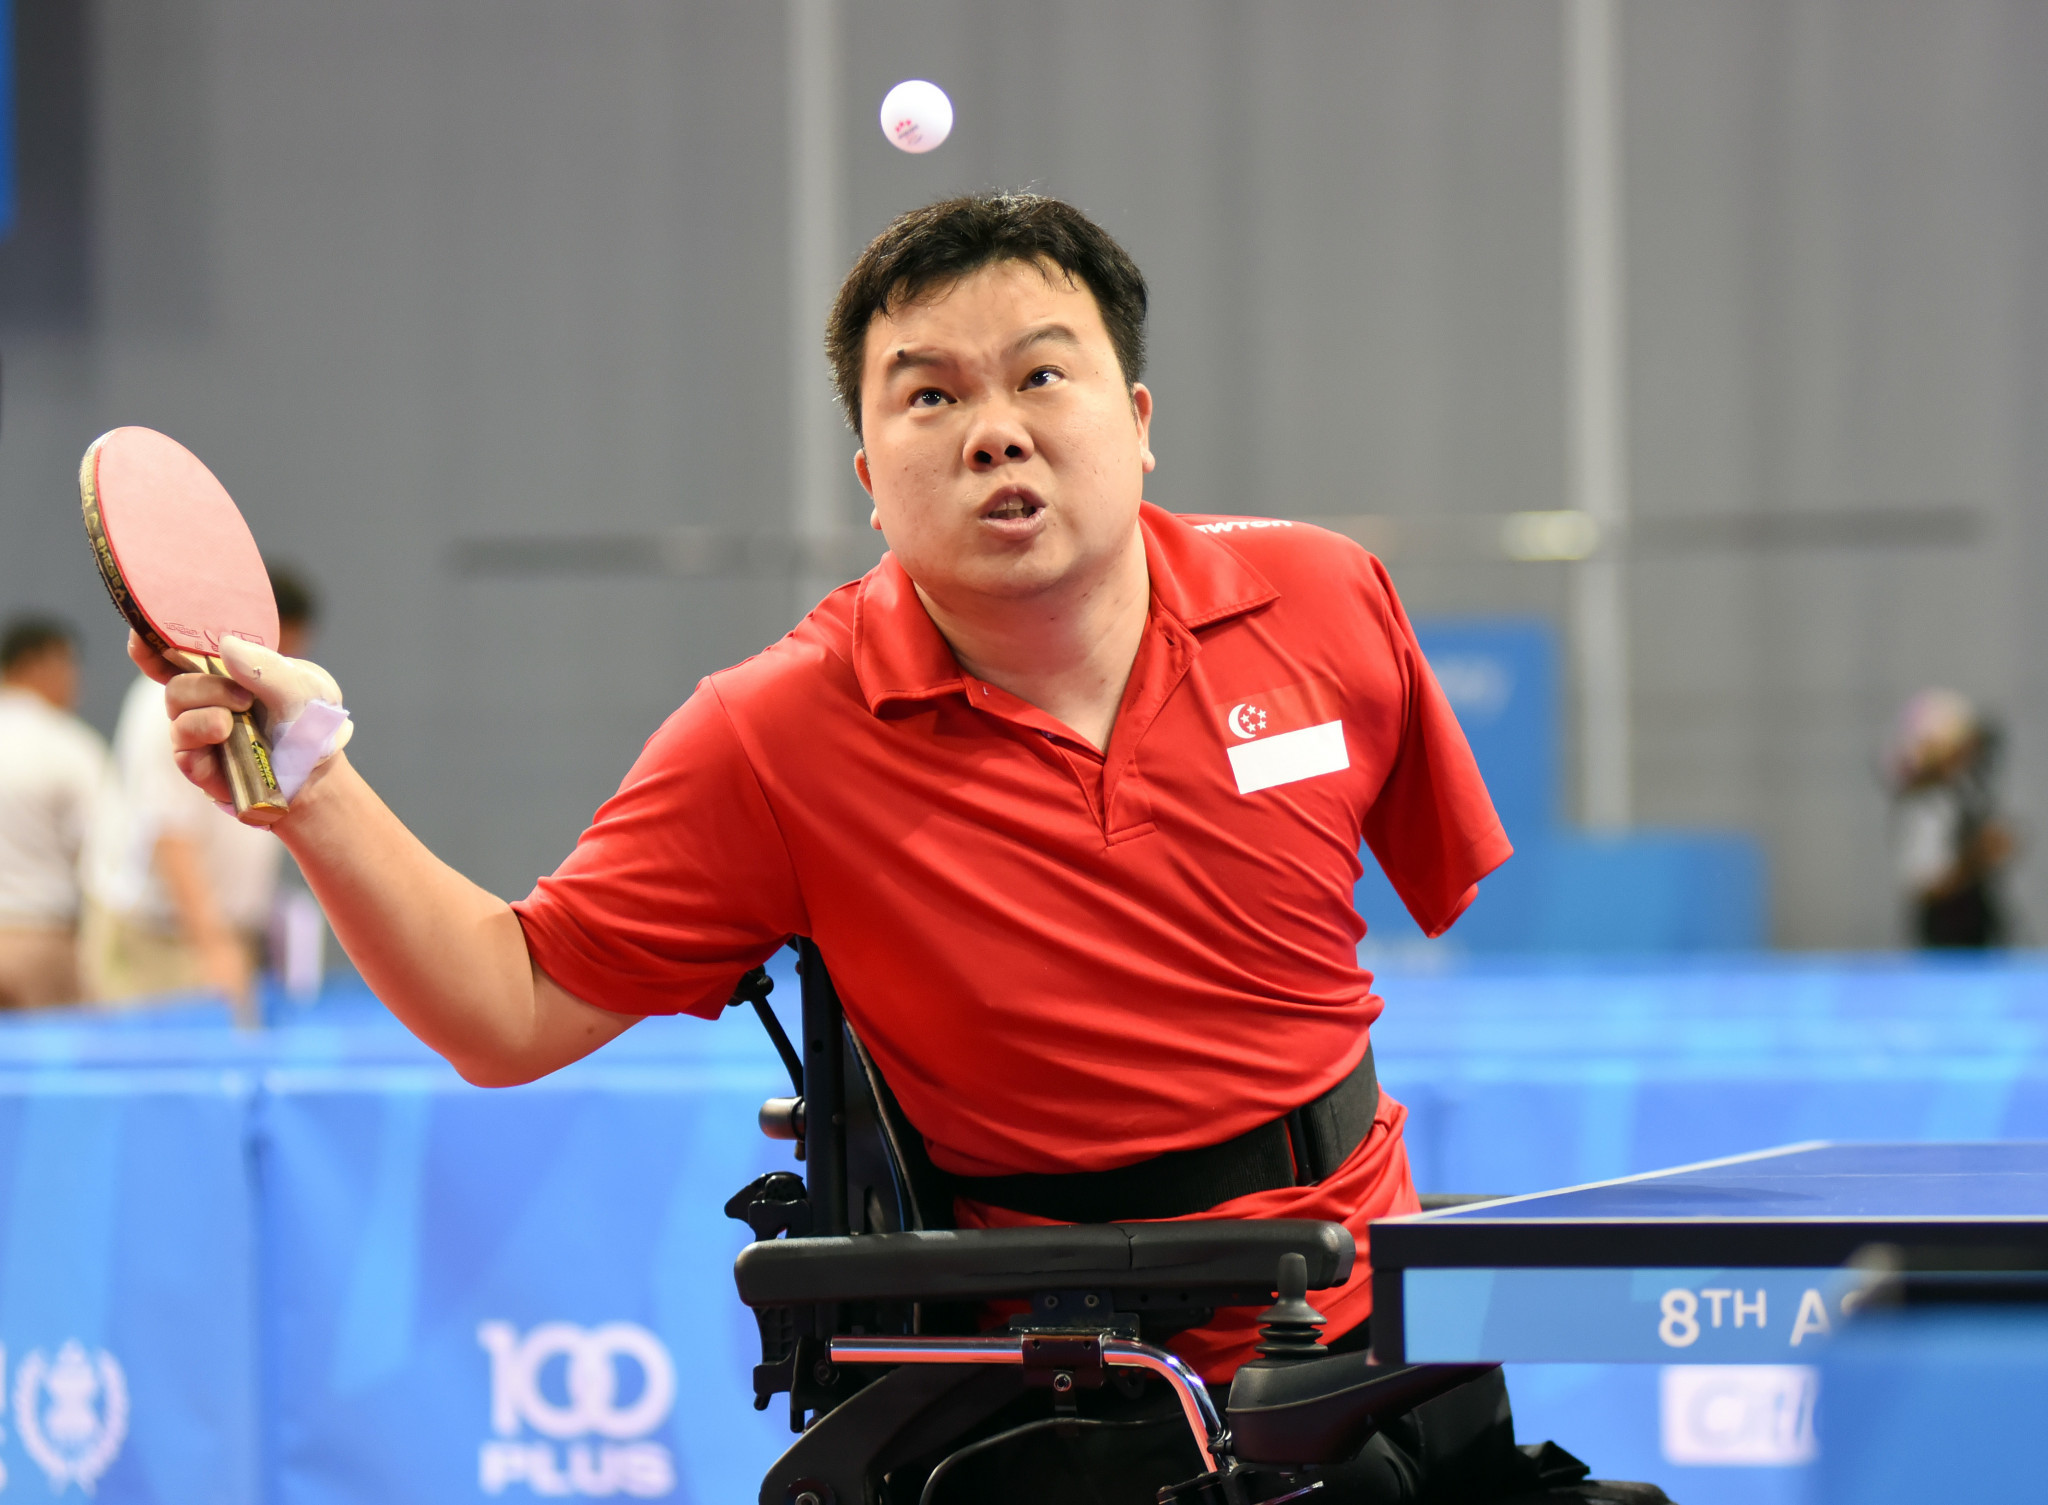 Table tennis is among the sports on the programme for the 2019 ASEAN Para Games in the Philippines ©Getty Images